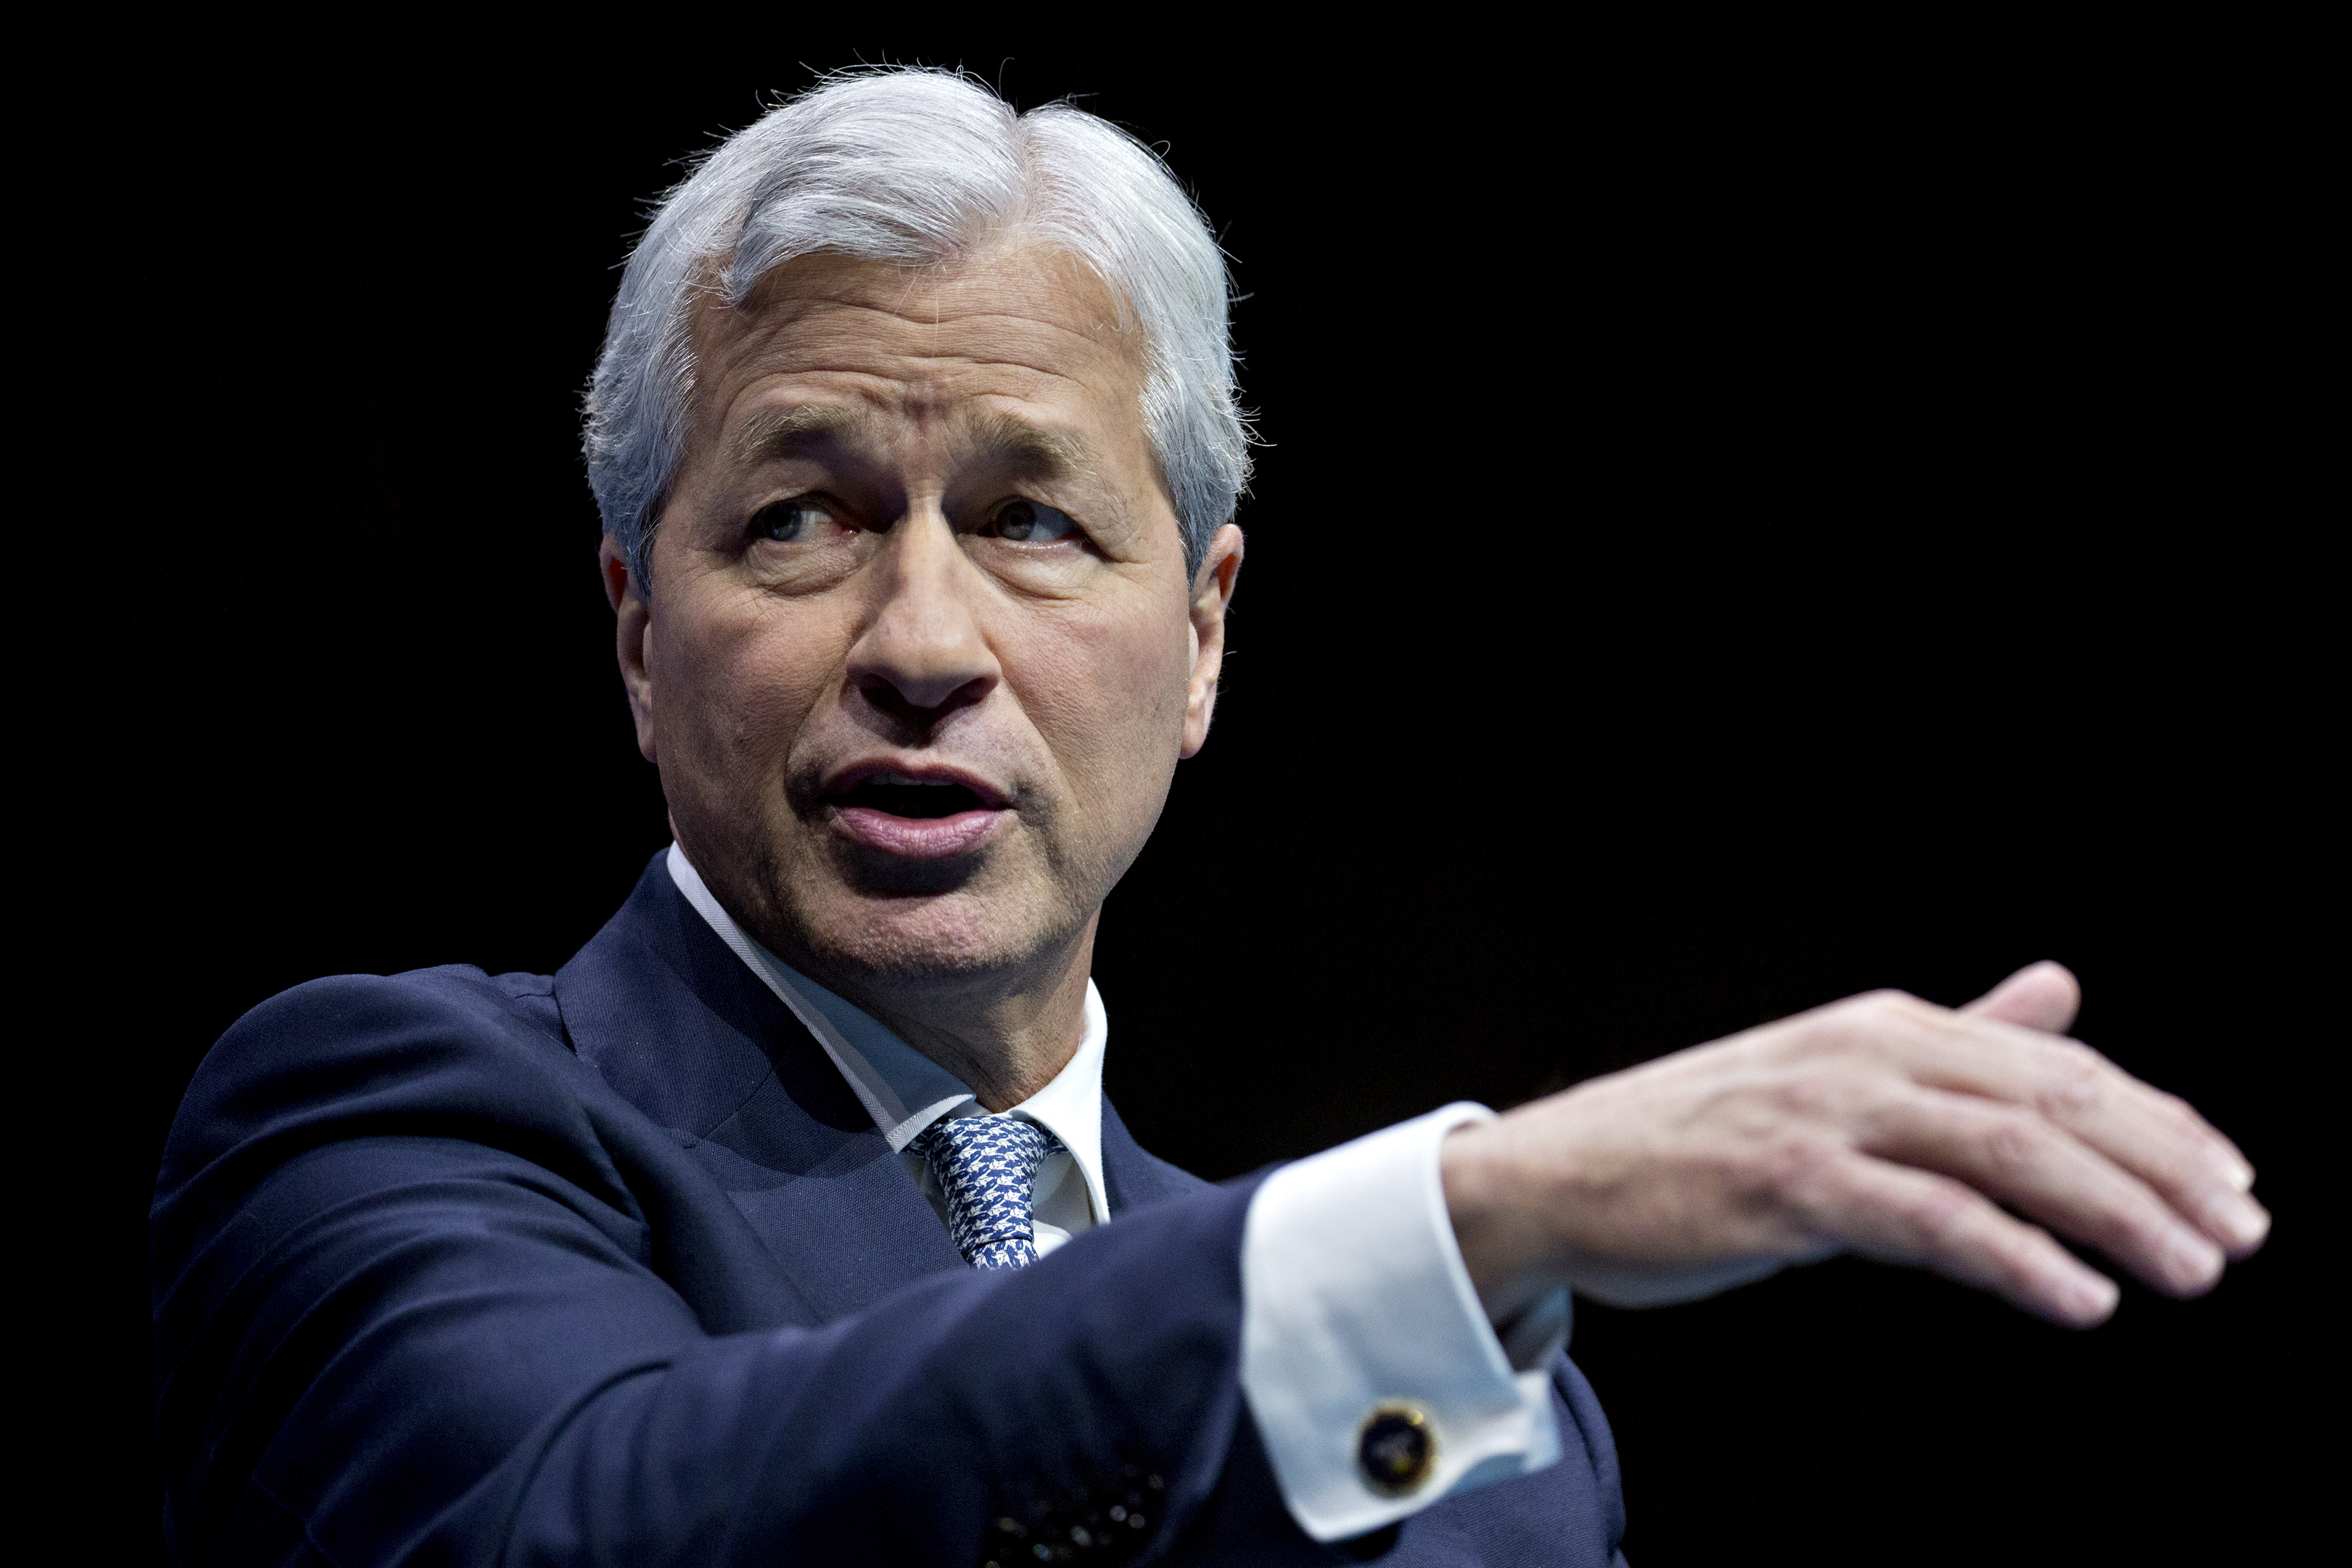 Jamie Dimon on TaxHike Proposals Rich ‘Can Afford to Pay More